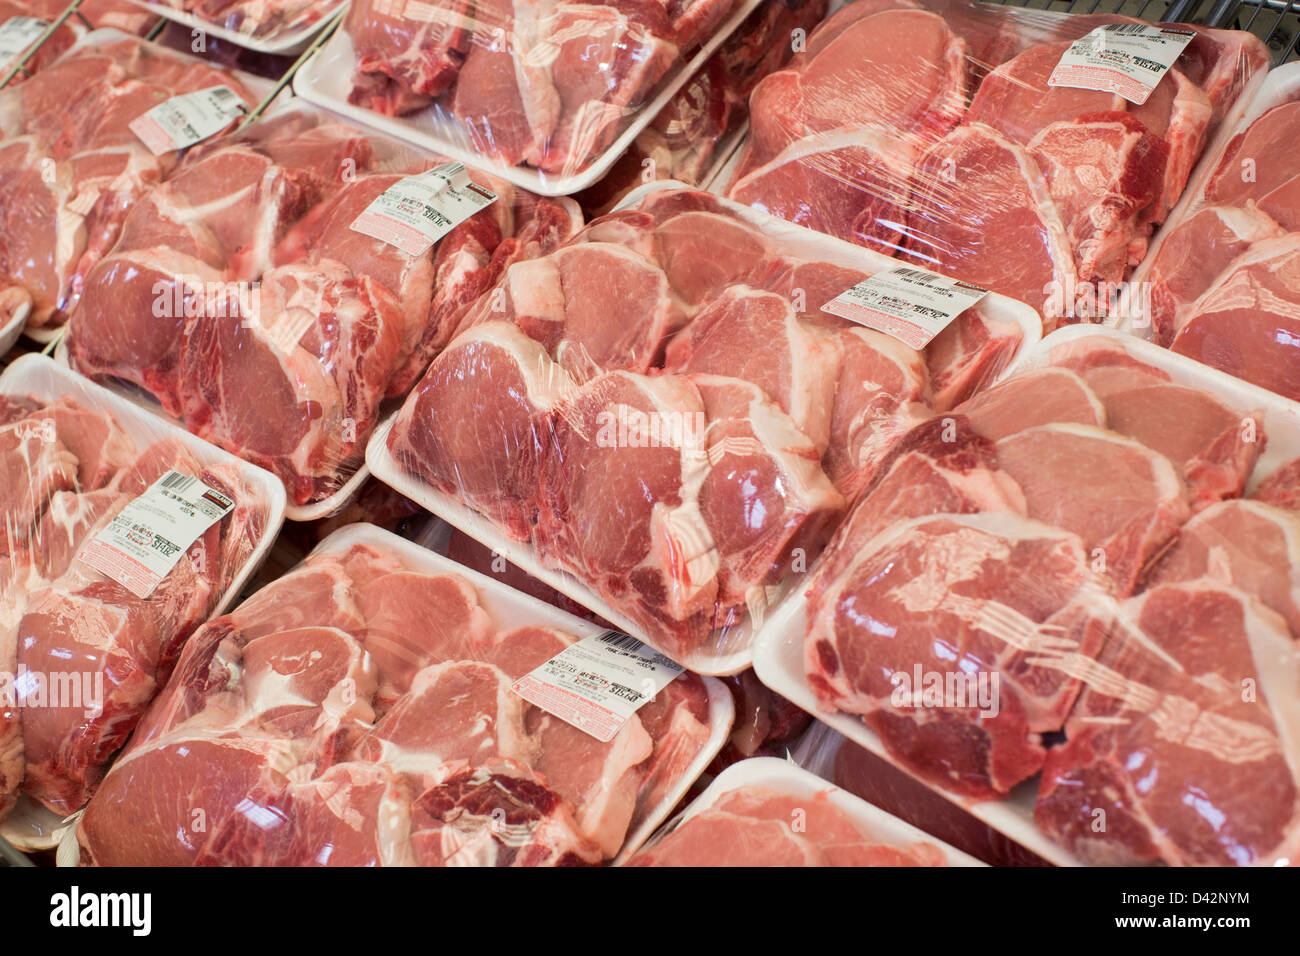 Pork products on display at a Costco Wholesale Warehouse Club. Stock Photo